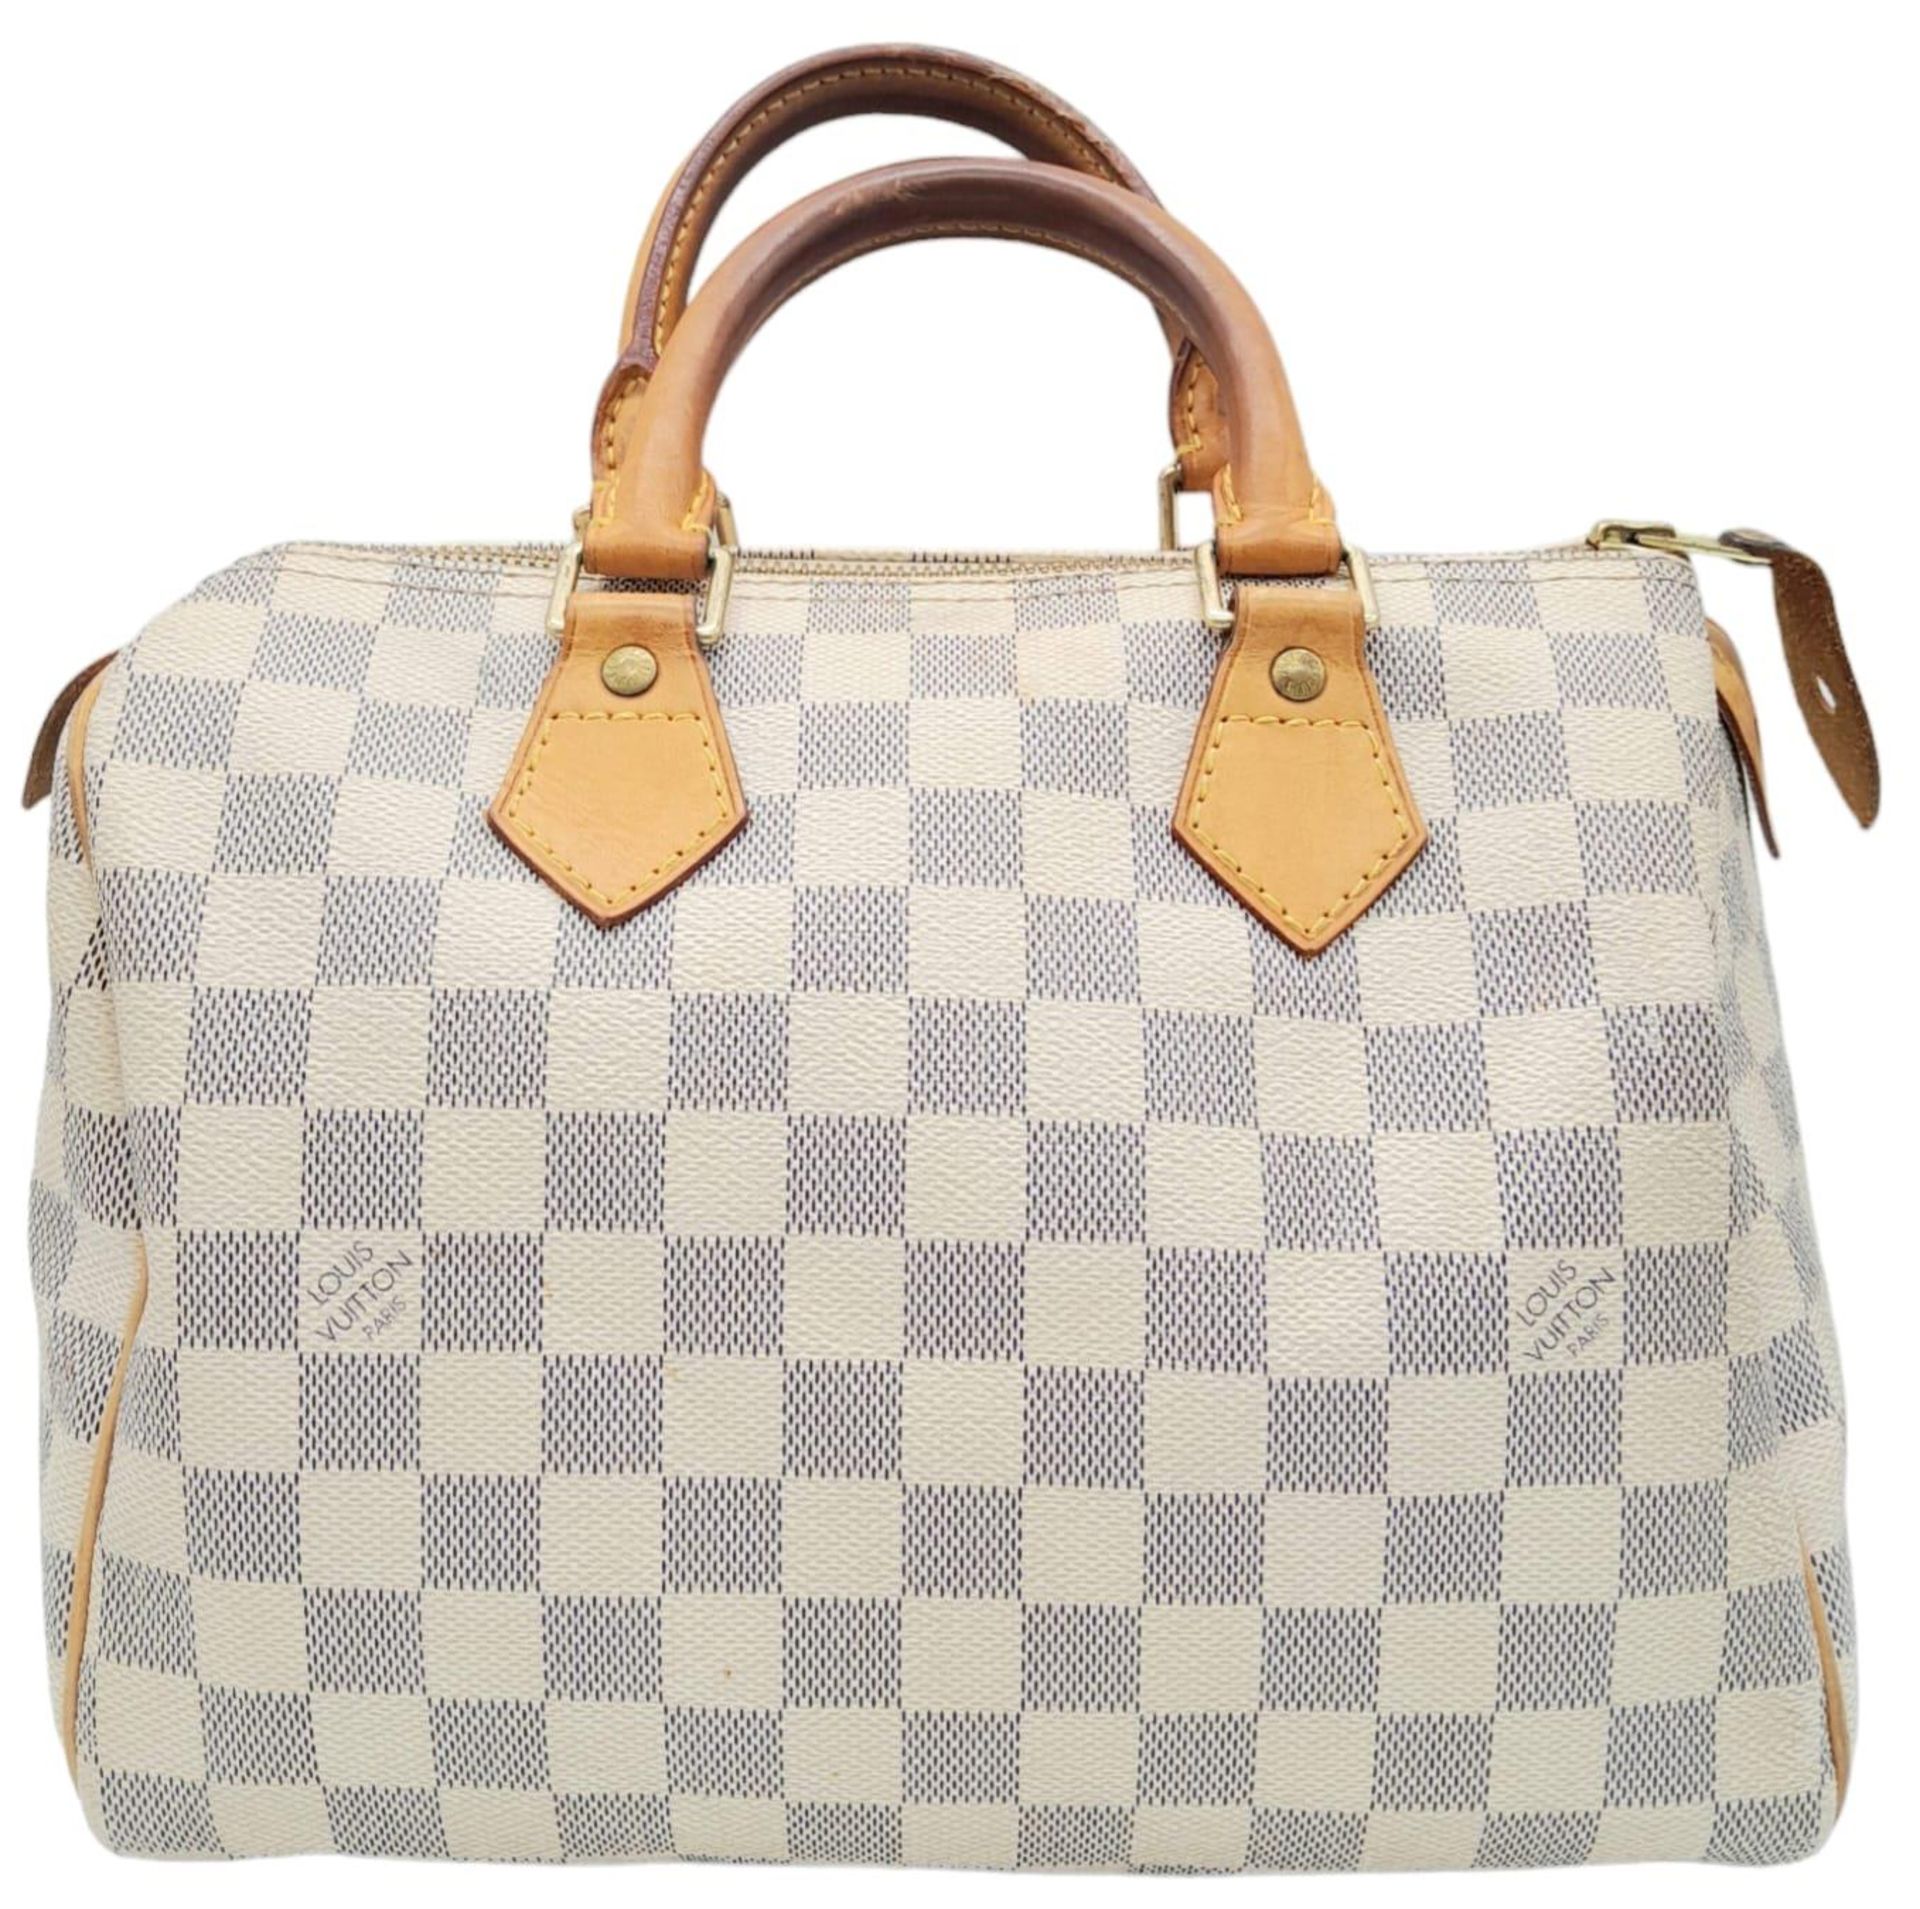 A Louis Vuitton White Canvas Damier Azur Speedy Handbag. Leather exterior, Rolled leather handles, a - Image 2 of 7